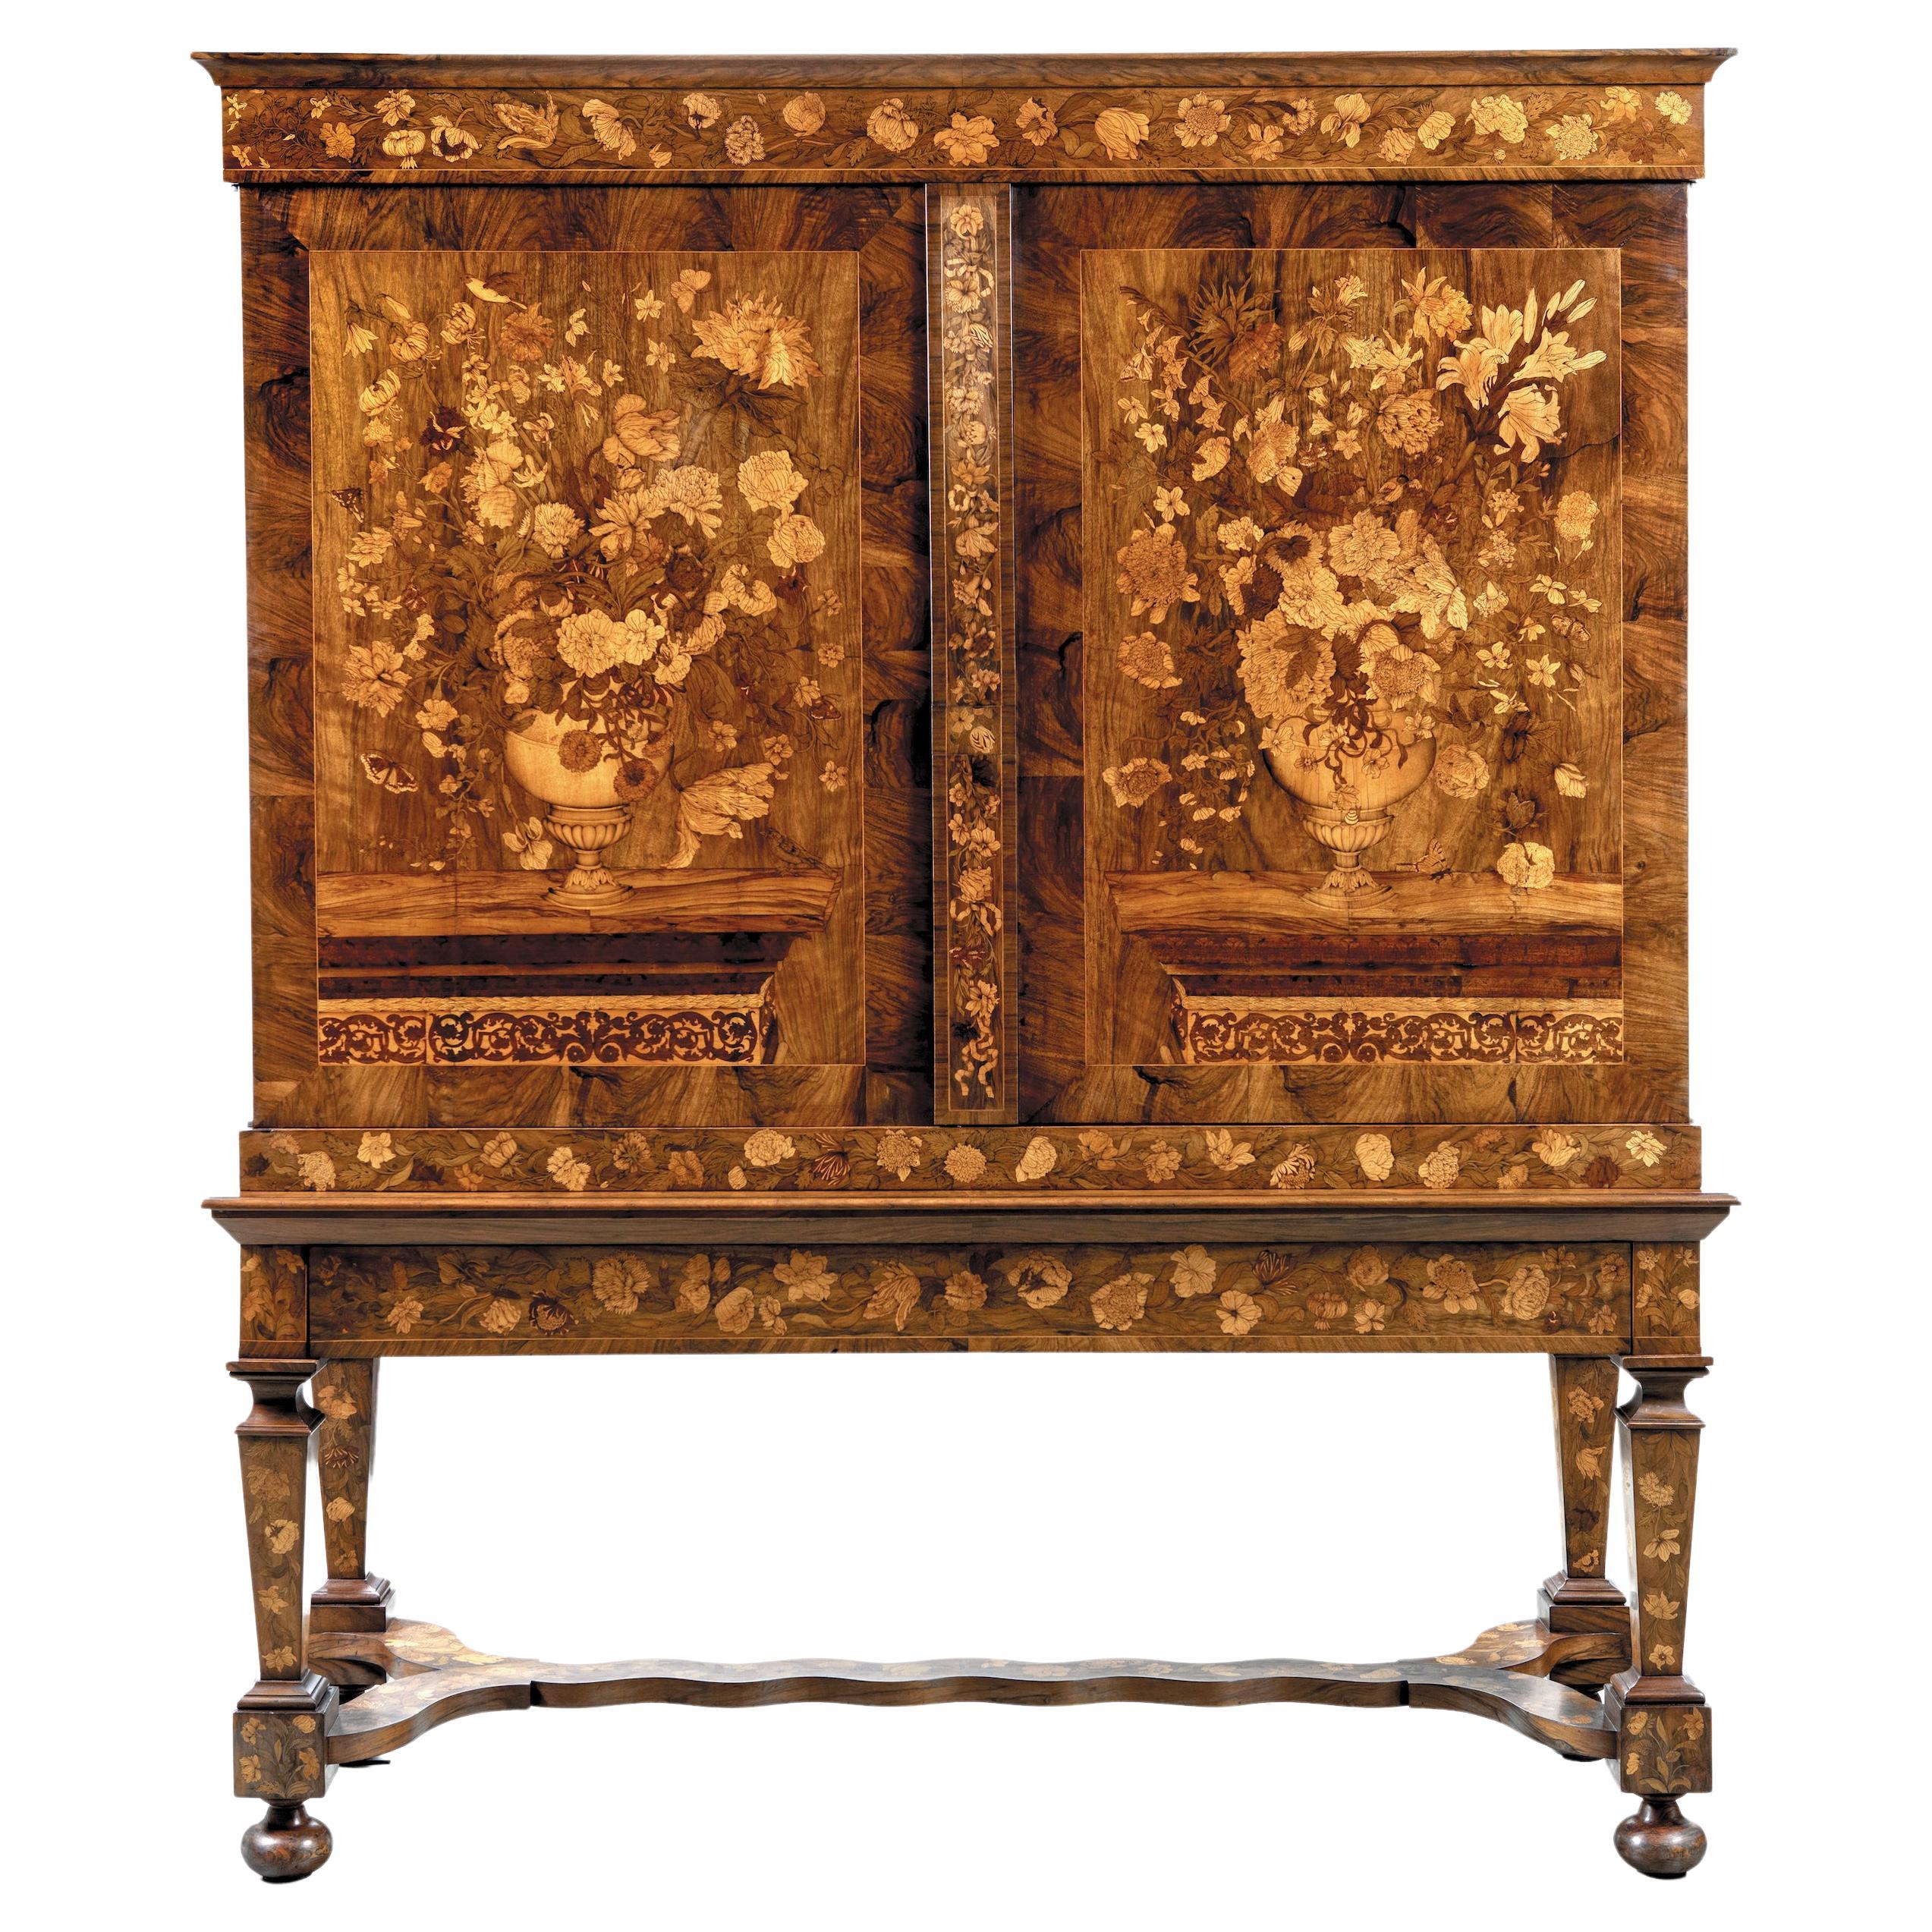 Highly Important Dutch Floral Marquetry Cabinet by Jan van Mekeren, circa 1700 For Sale